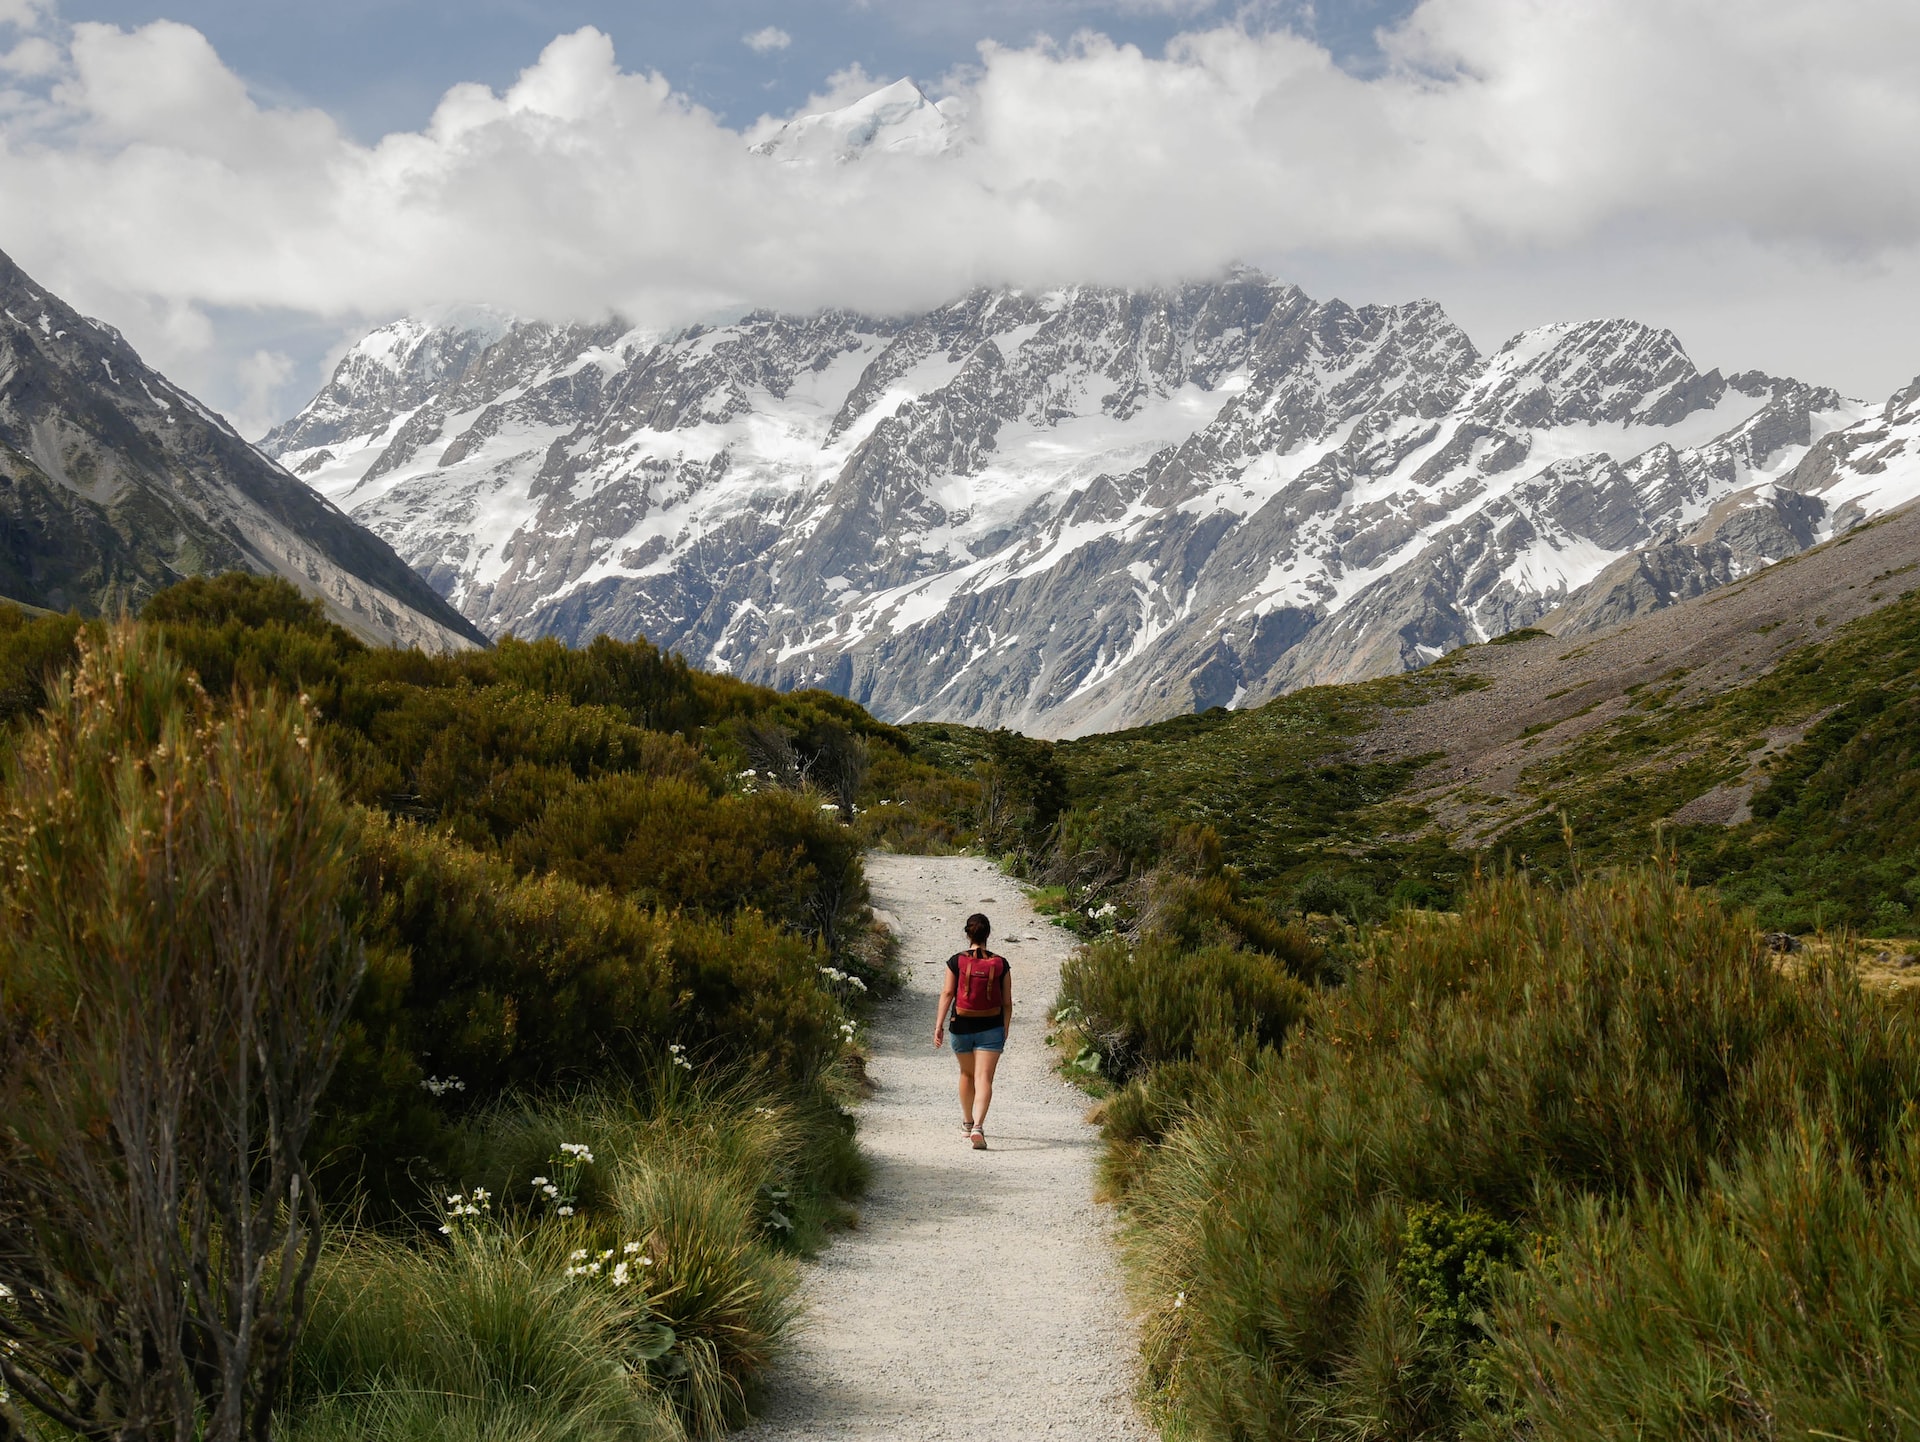 Breathtaking nature in one of New Zealand's treasured destinations, Mount Cook
